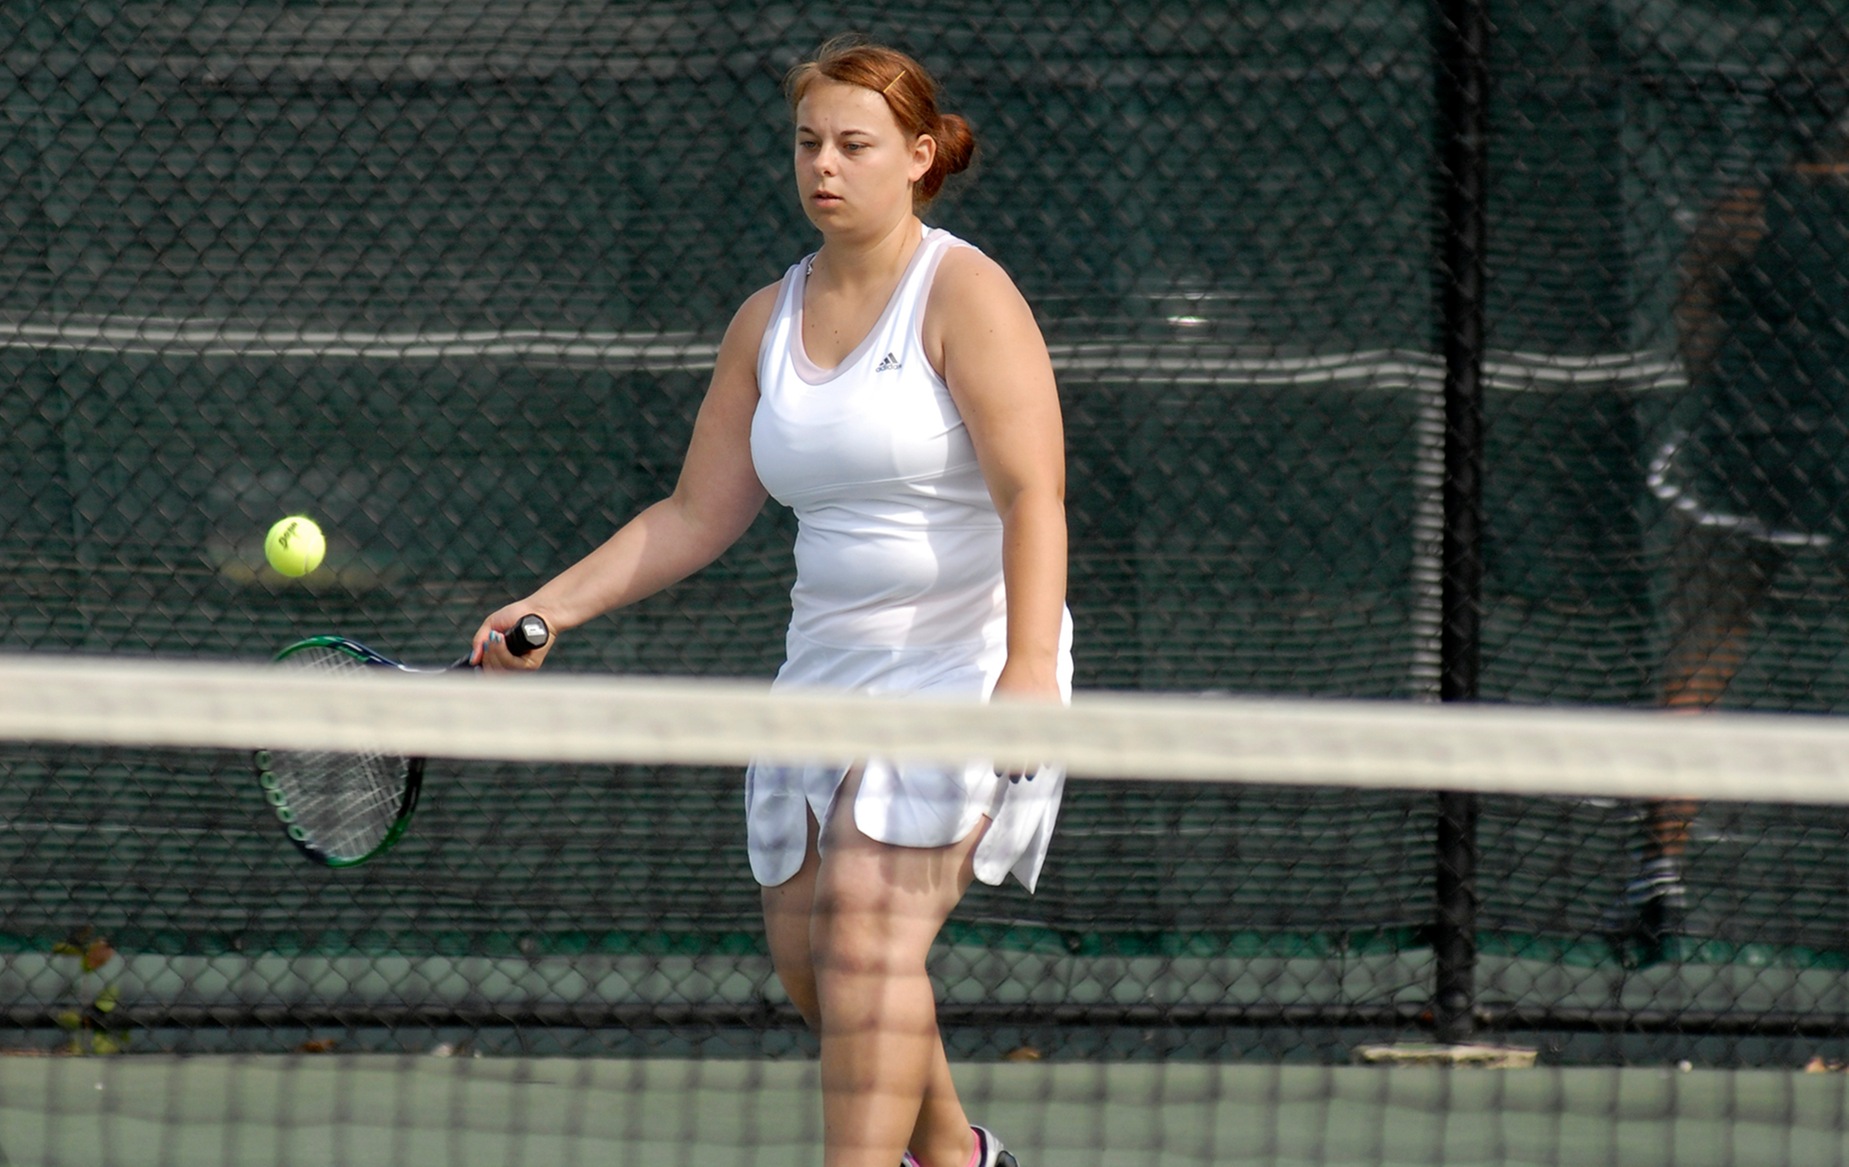 St. Francis Defeats Jackets in Women’s Tennis Action